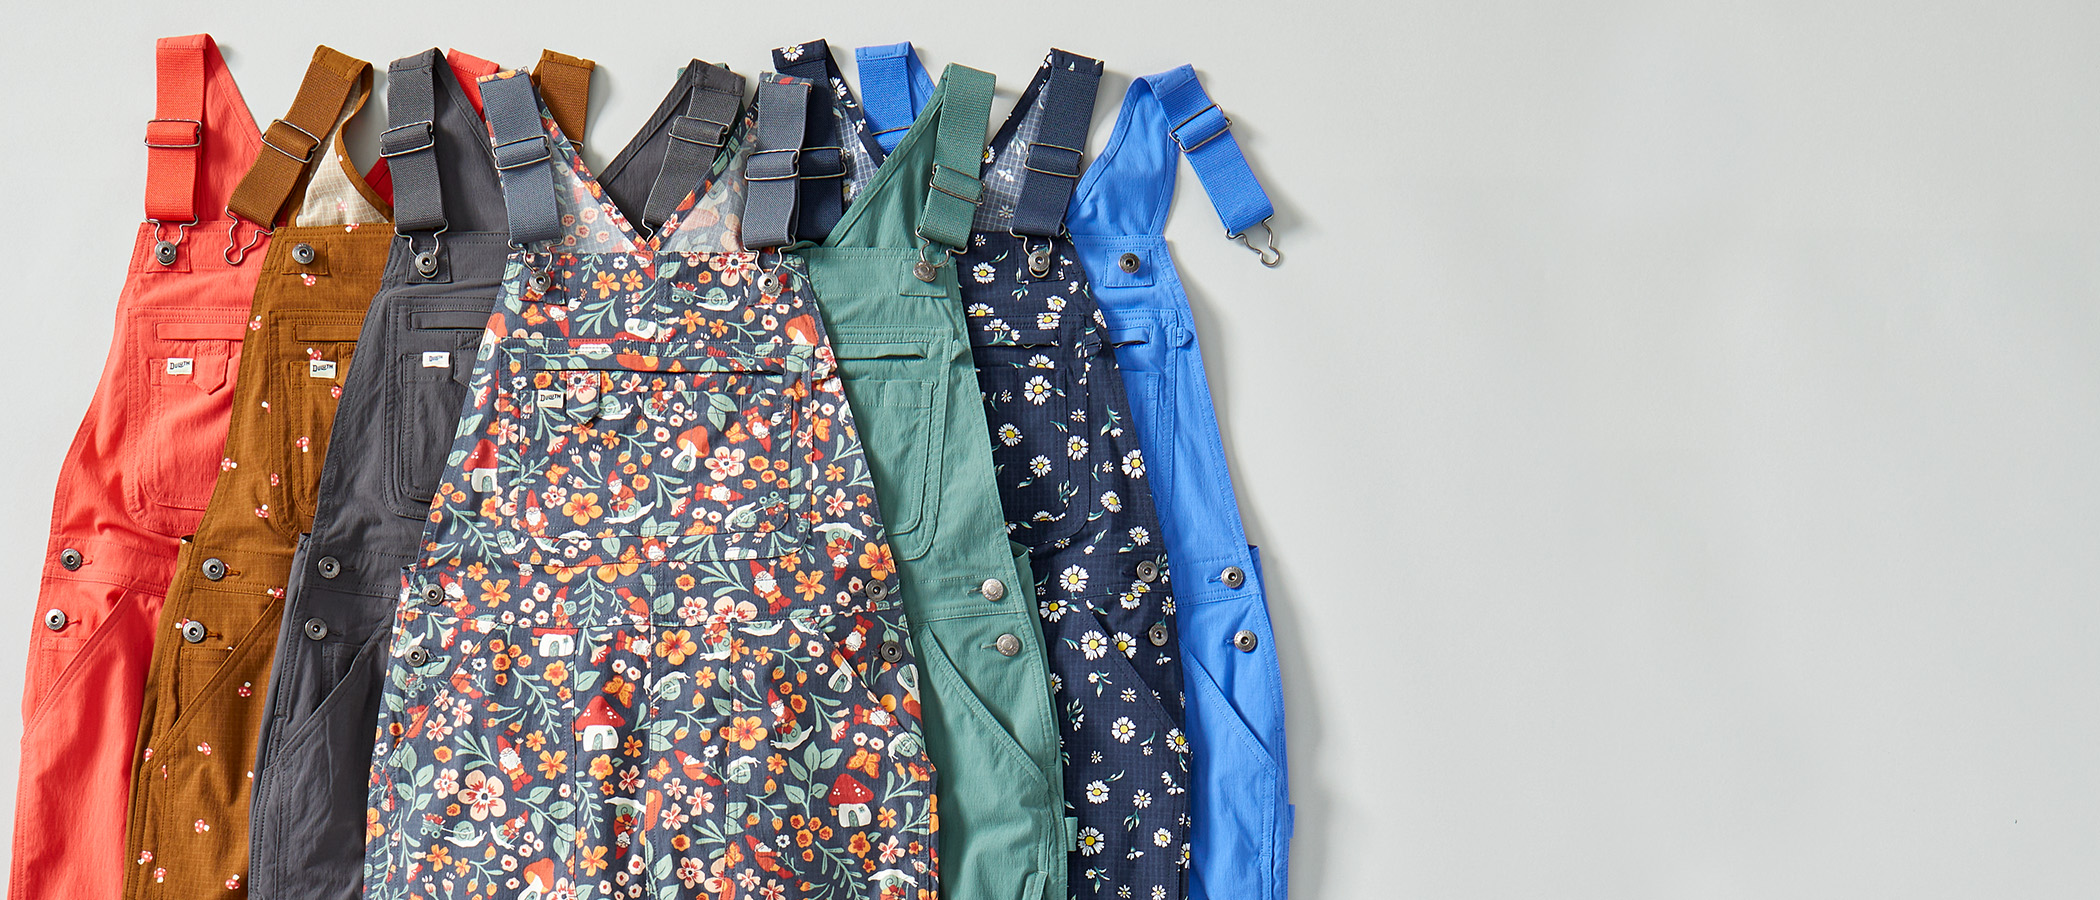 A collection of Heirloom Gardening overalls in a variety of colors and patterns